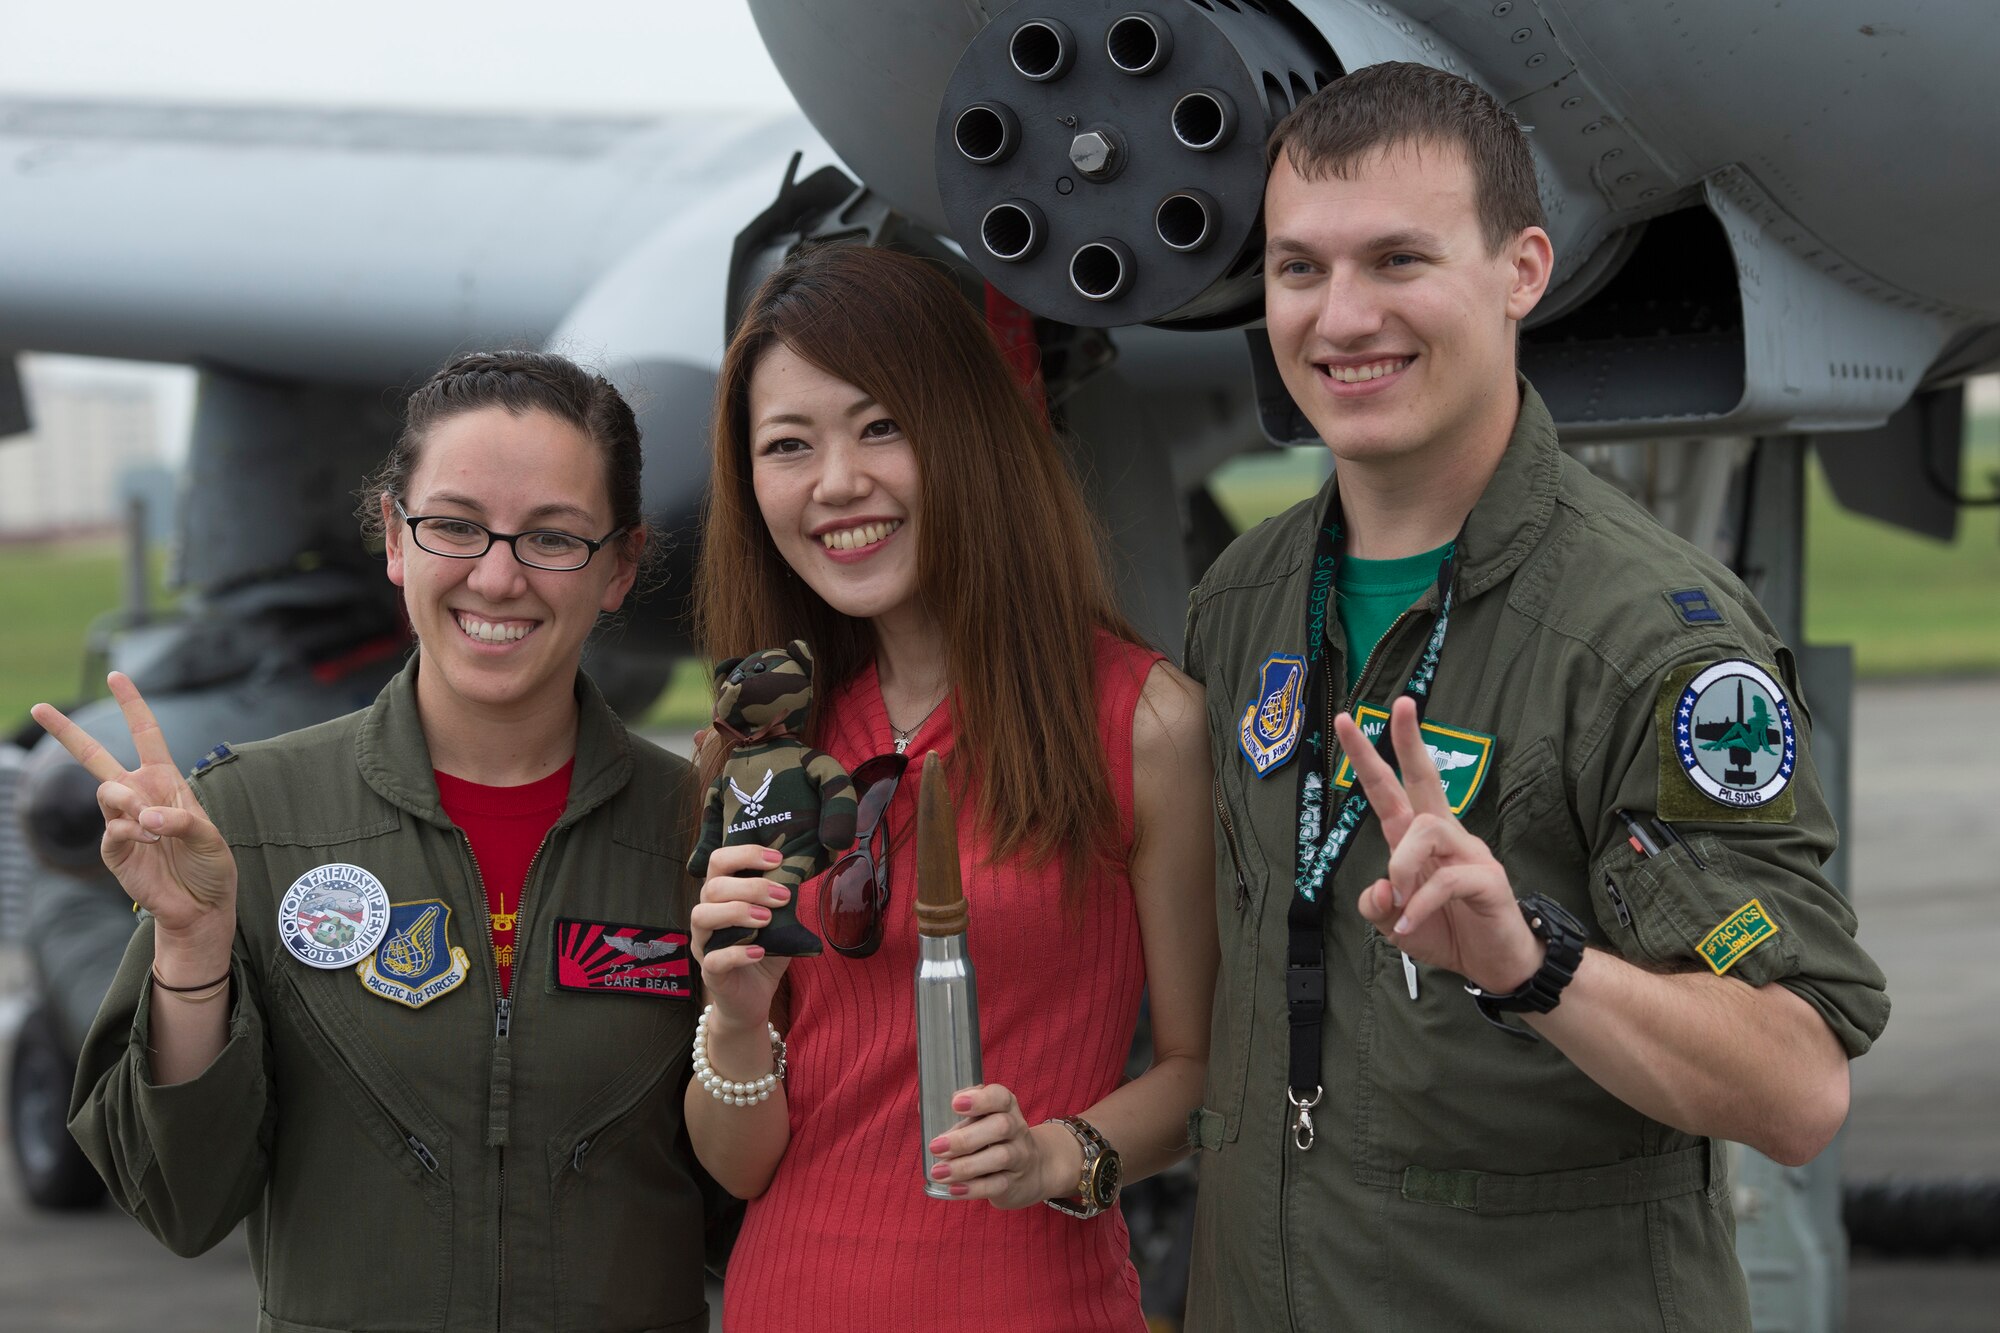 (Right to left) Capt. Travis Vayda, 25th Fighter Squadron A-10 pilot, and Capt. Sydney Croxton, 36th Airlift Squadron C-130 Hercules pilot, pose for a photo with a Japanese festivalgoer during the 2016 Friendship Festival at Yokota Air Base, Japan, Sept. 18, 2016. (U.S. Air Force photo by Yasuo Osakabe/Released)